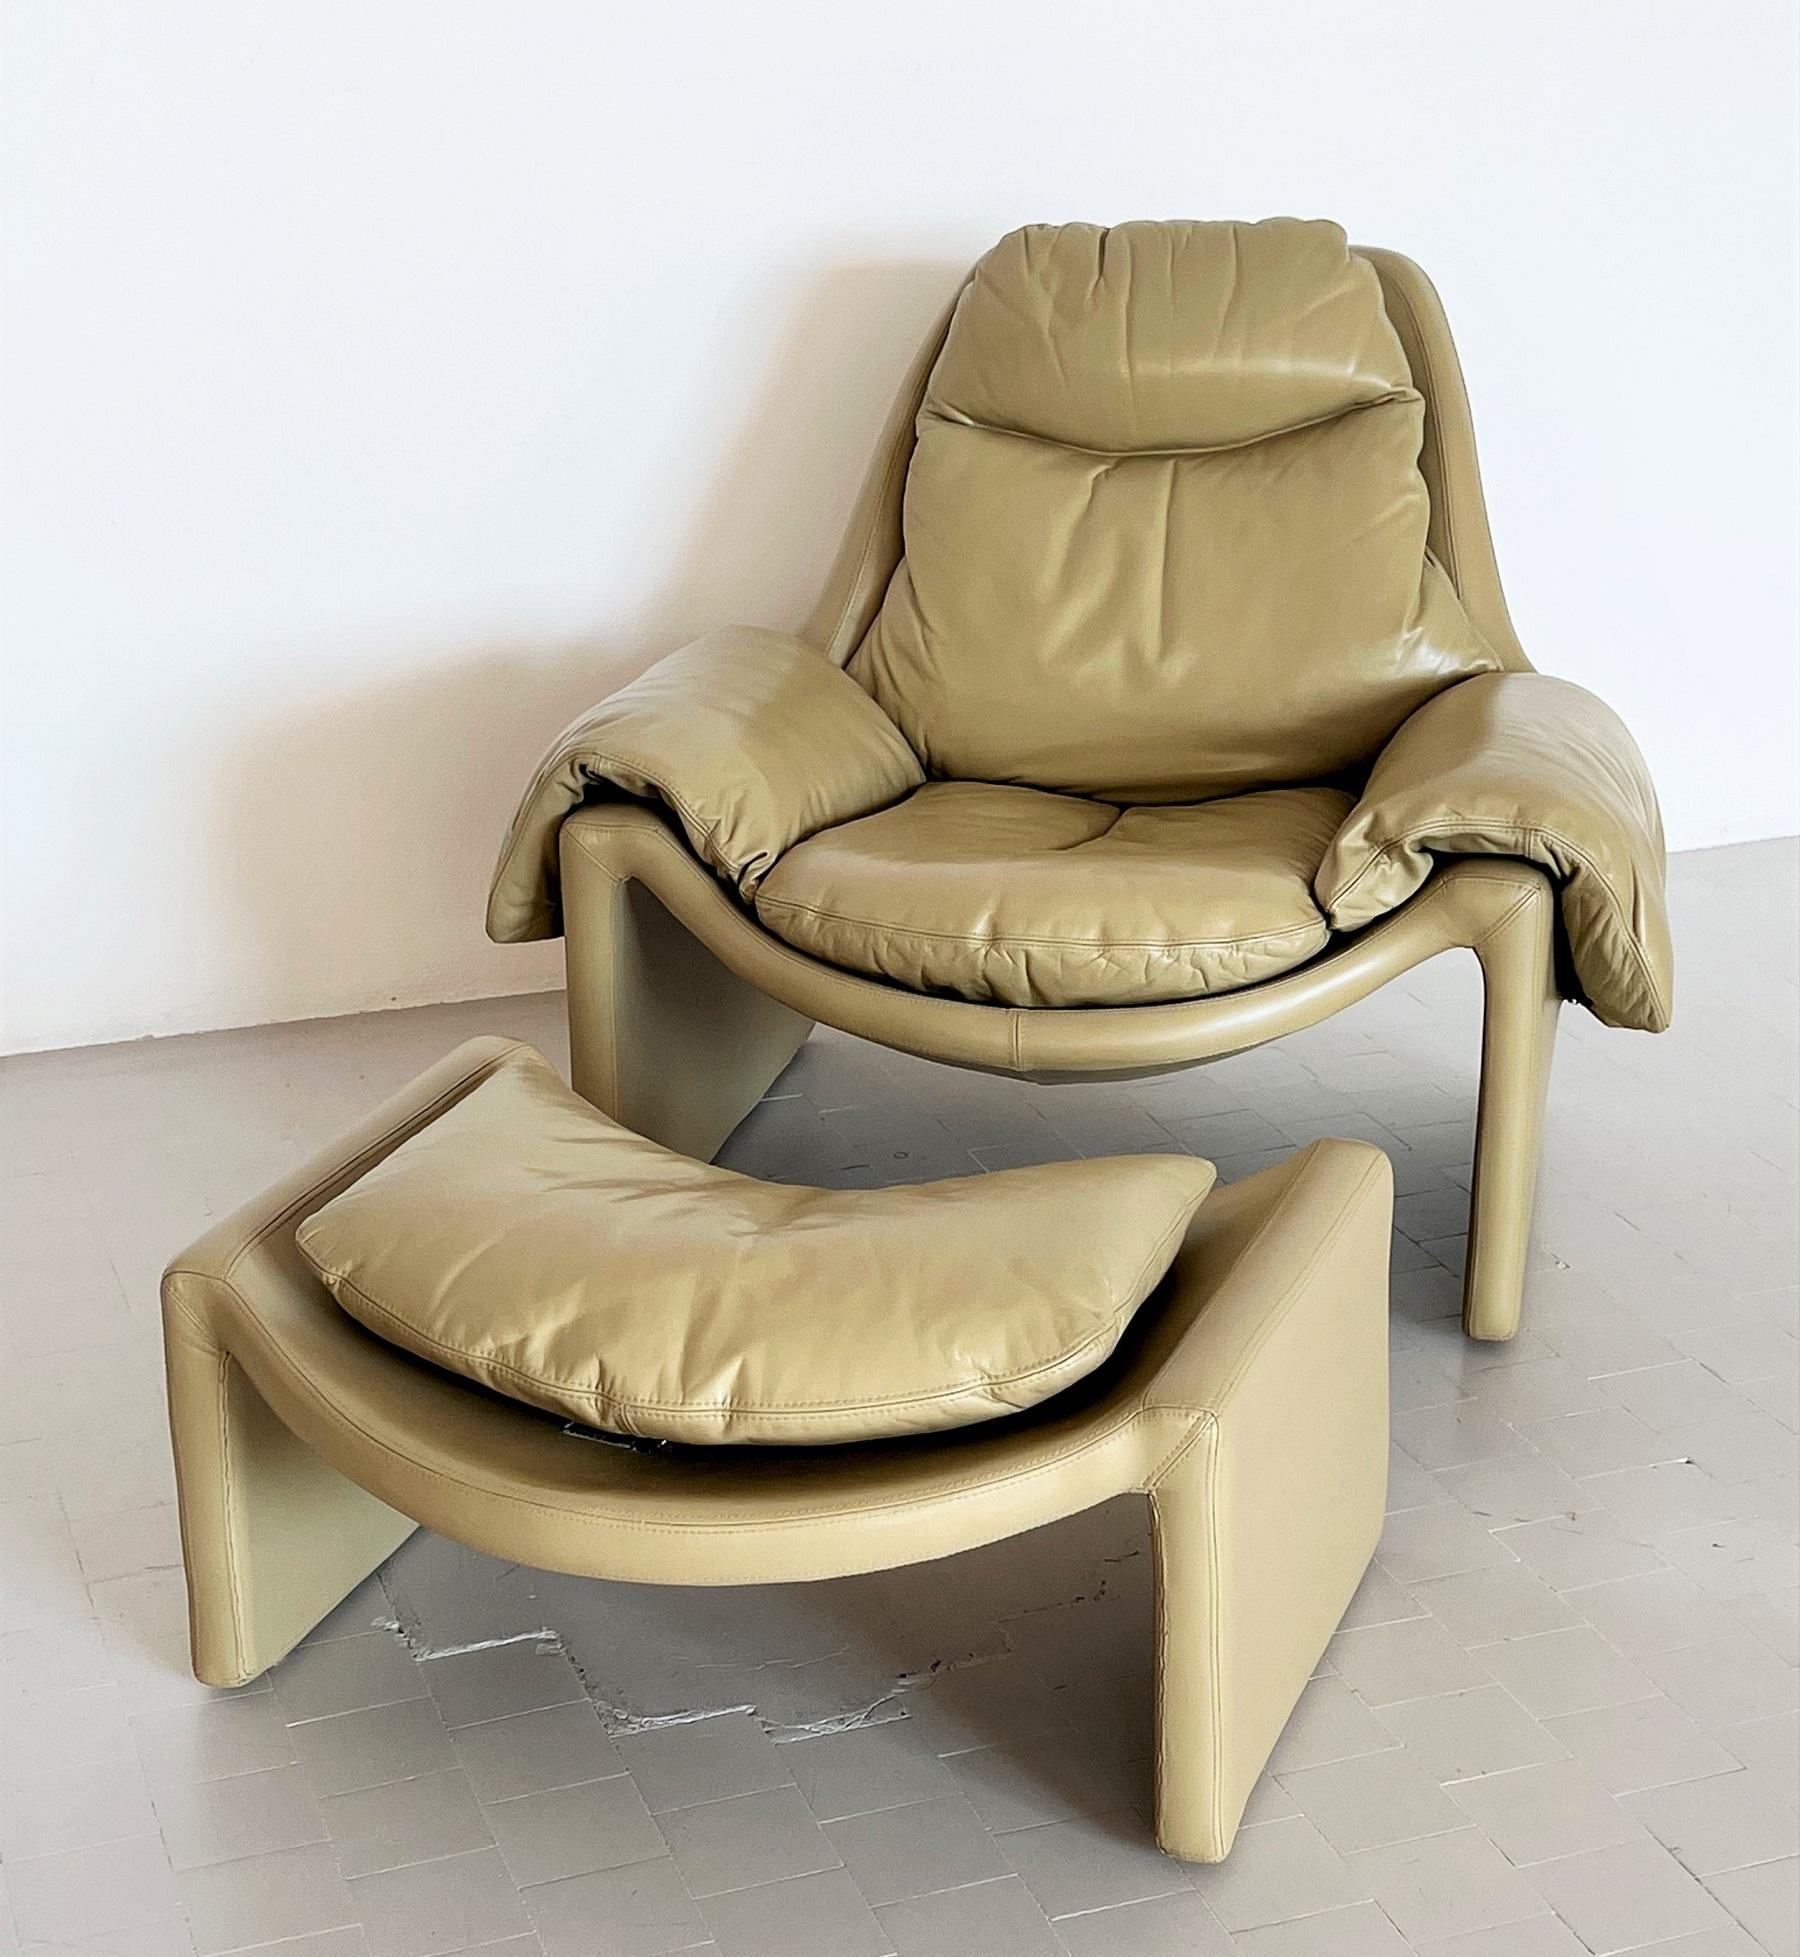 Vittorio Introini P60 Set of Lounge Chair with Ottoman for Saporiti, 1960s For Sale 2